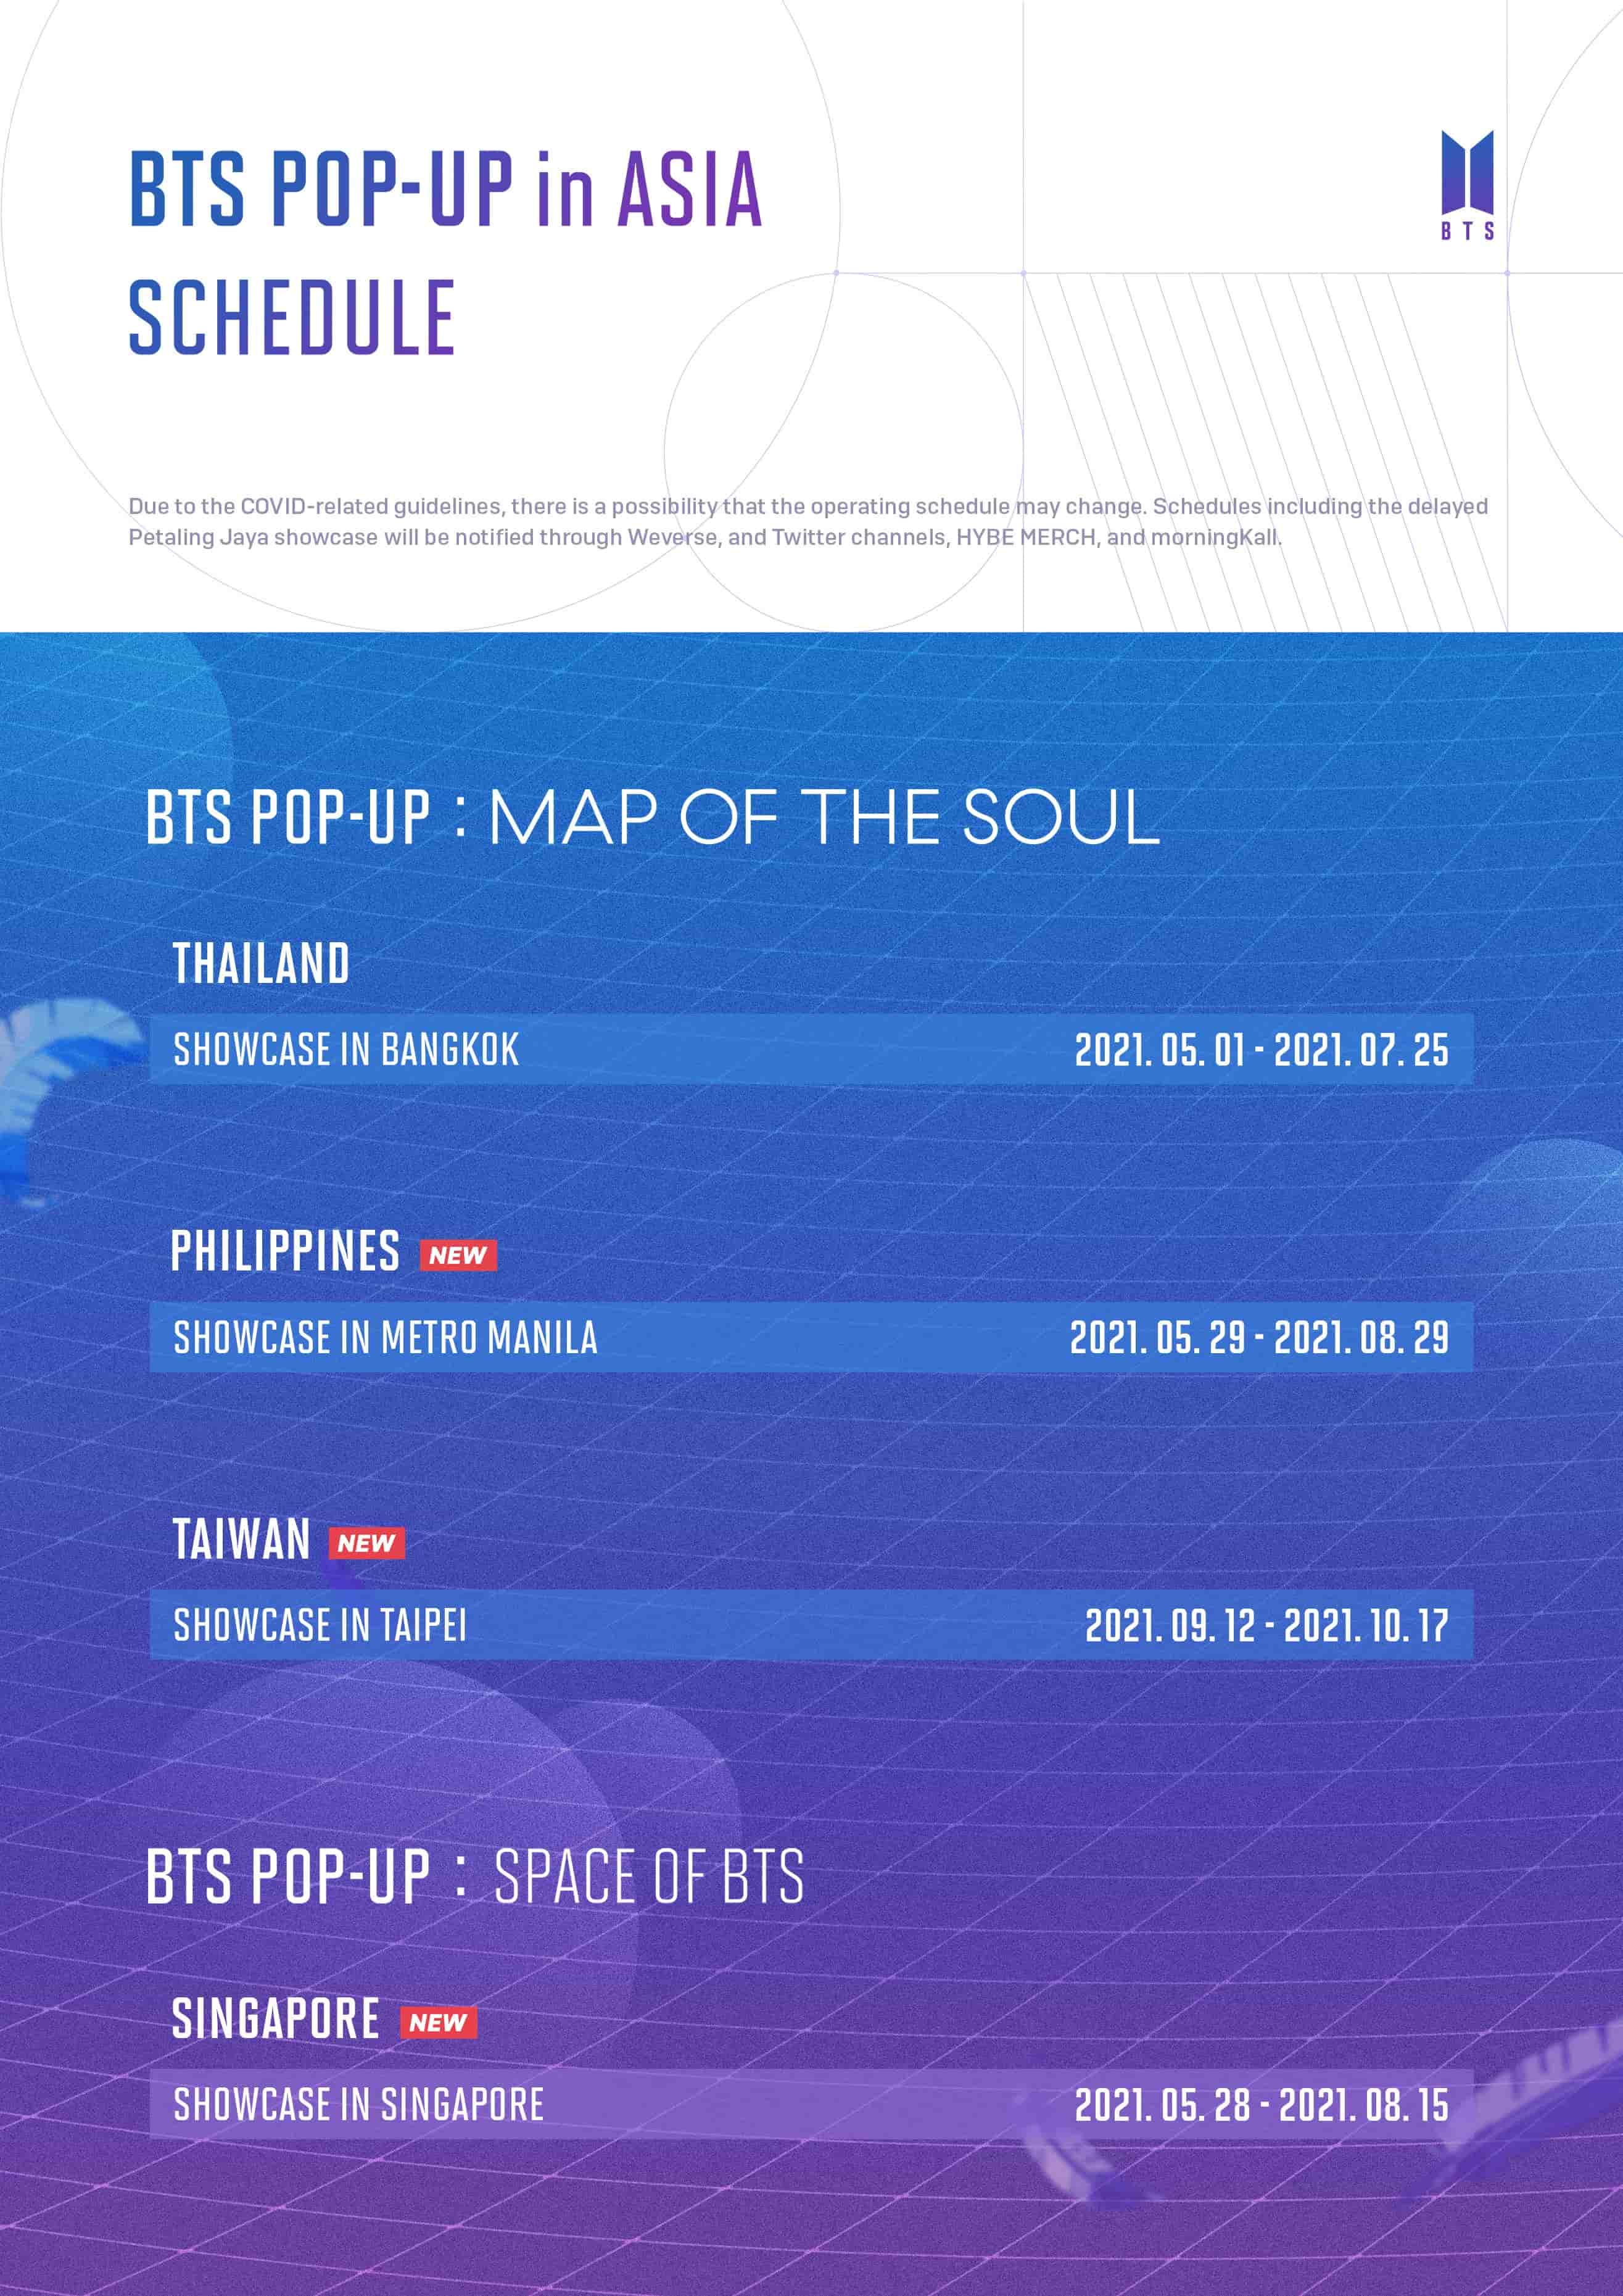 Dates and location for the BTS POP-UP: MAP OF THE SOUL